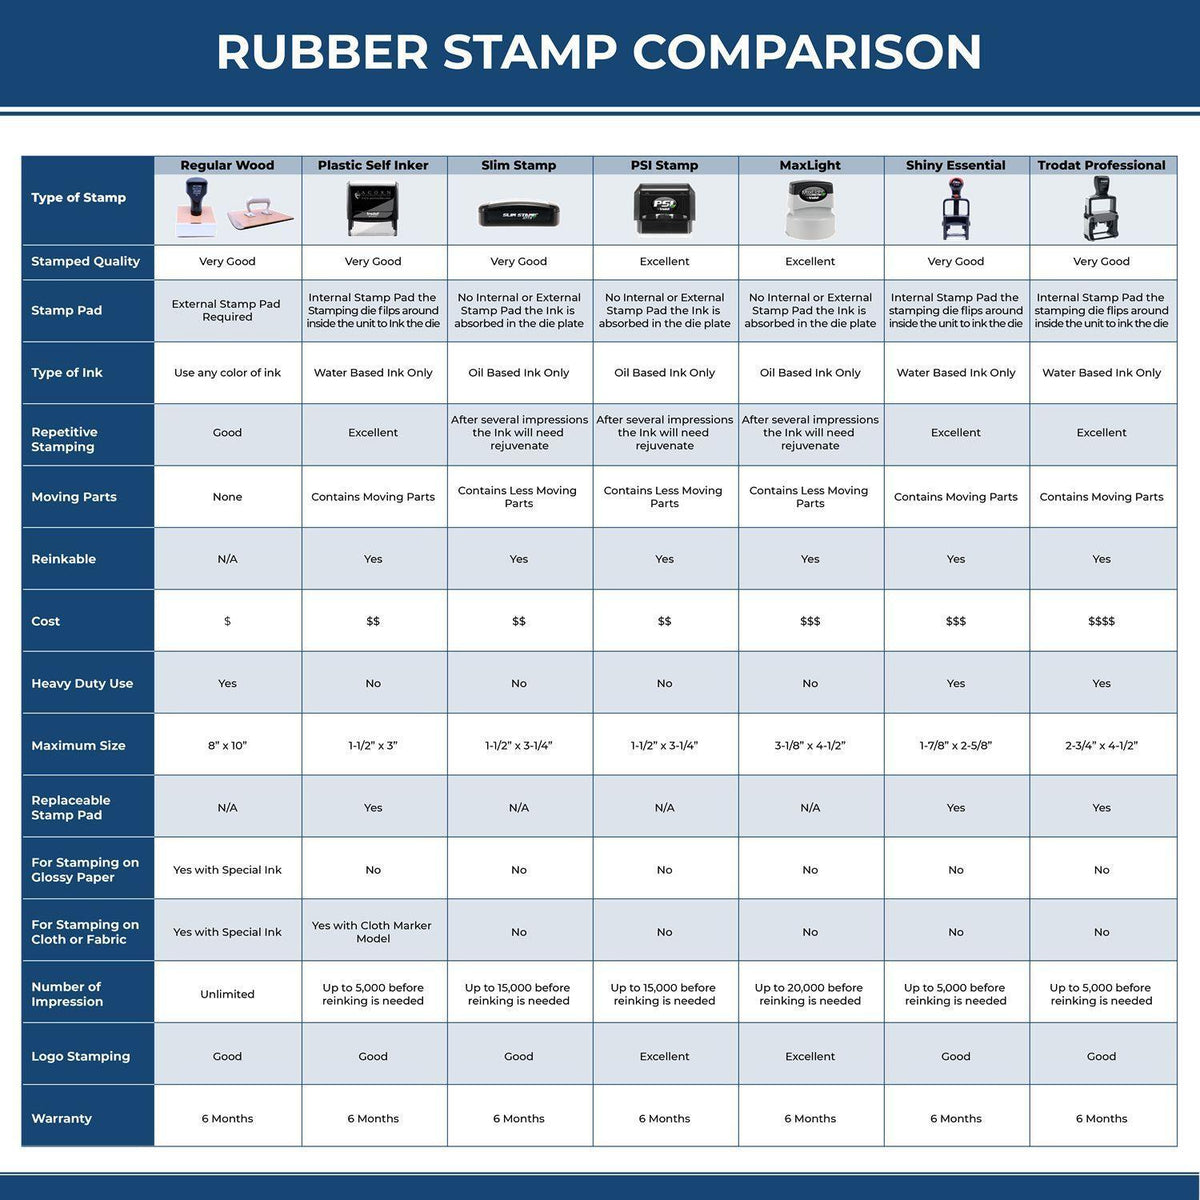 Large Pre-Inked Narrow Font Approved for Payment Stamp 4892SLIM Rubber Stamp Comparison